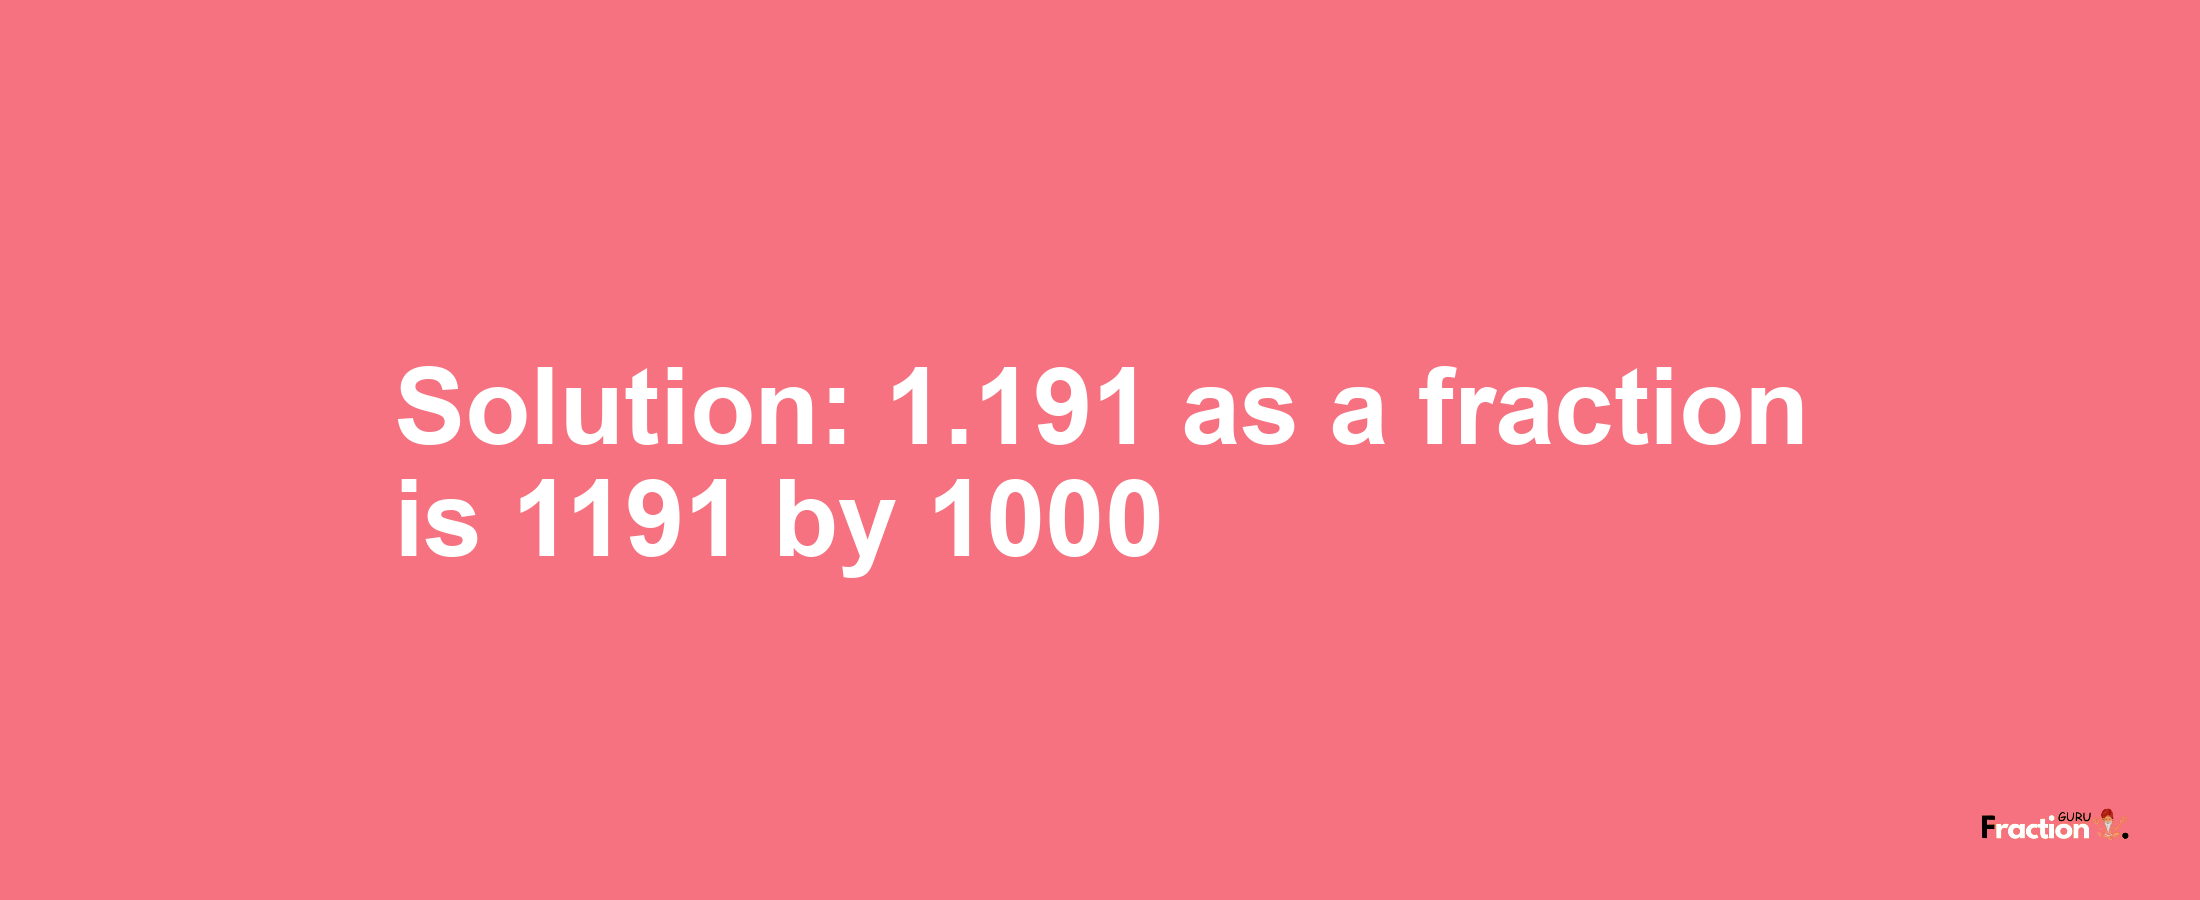 Solution:1.191 as a fraction is 1191/1000